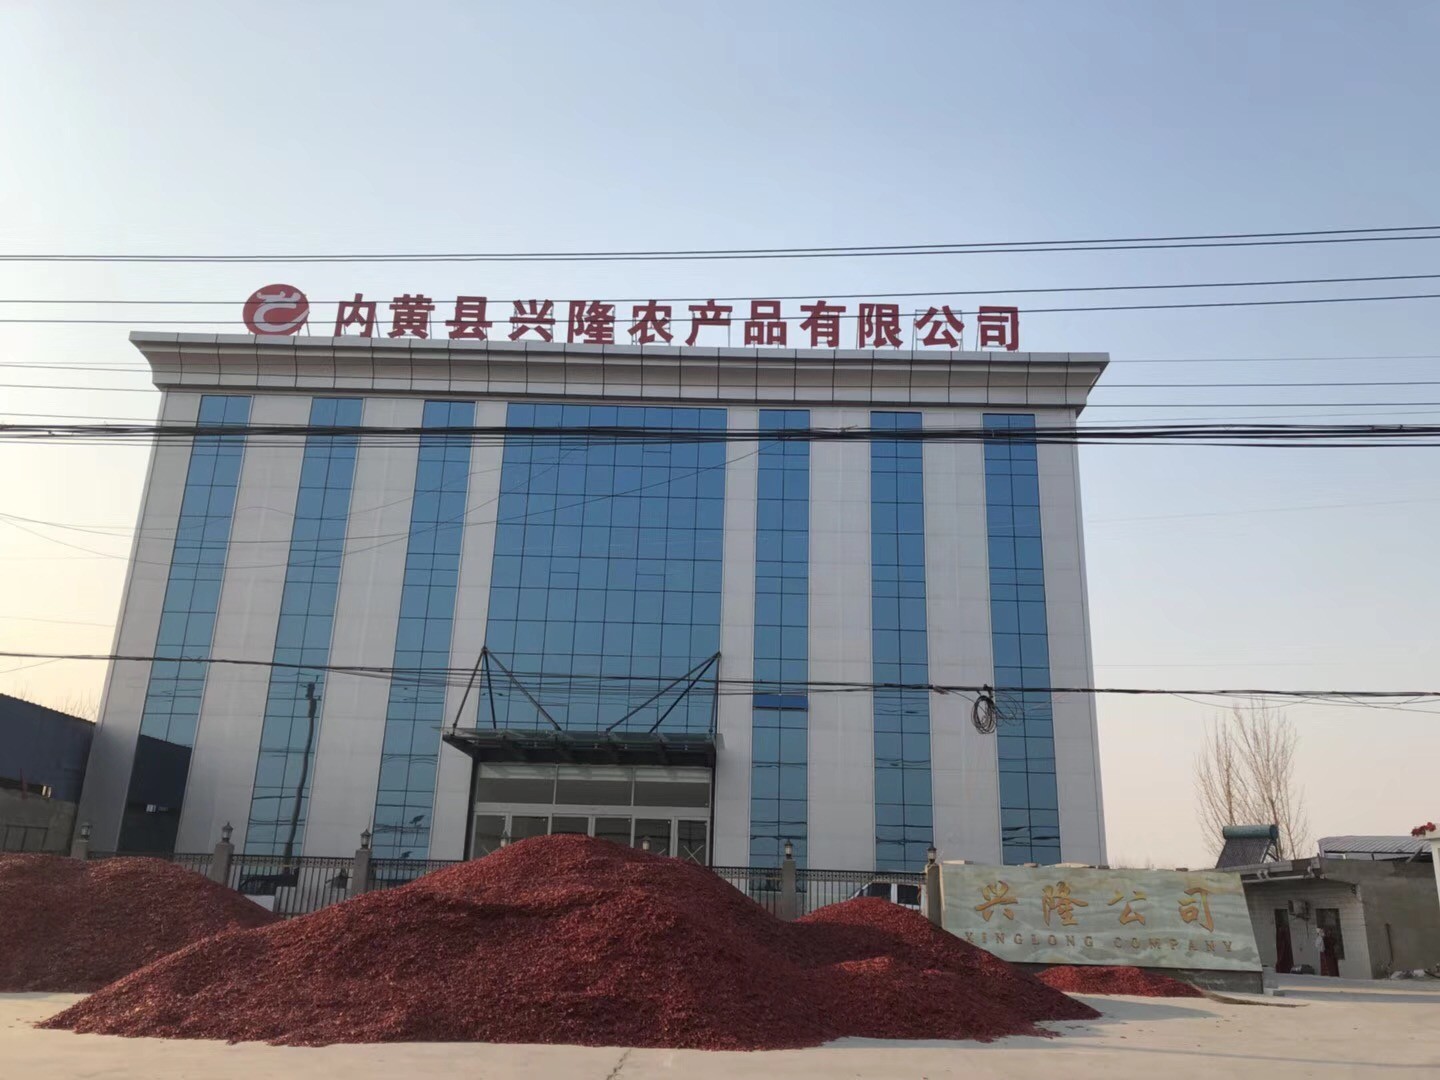 Çin Neihuang Xinglong Agricultural Products Co. Ltd